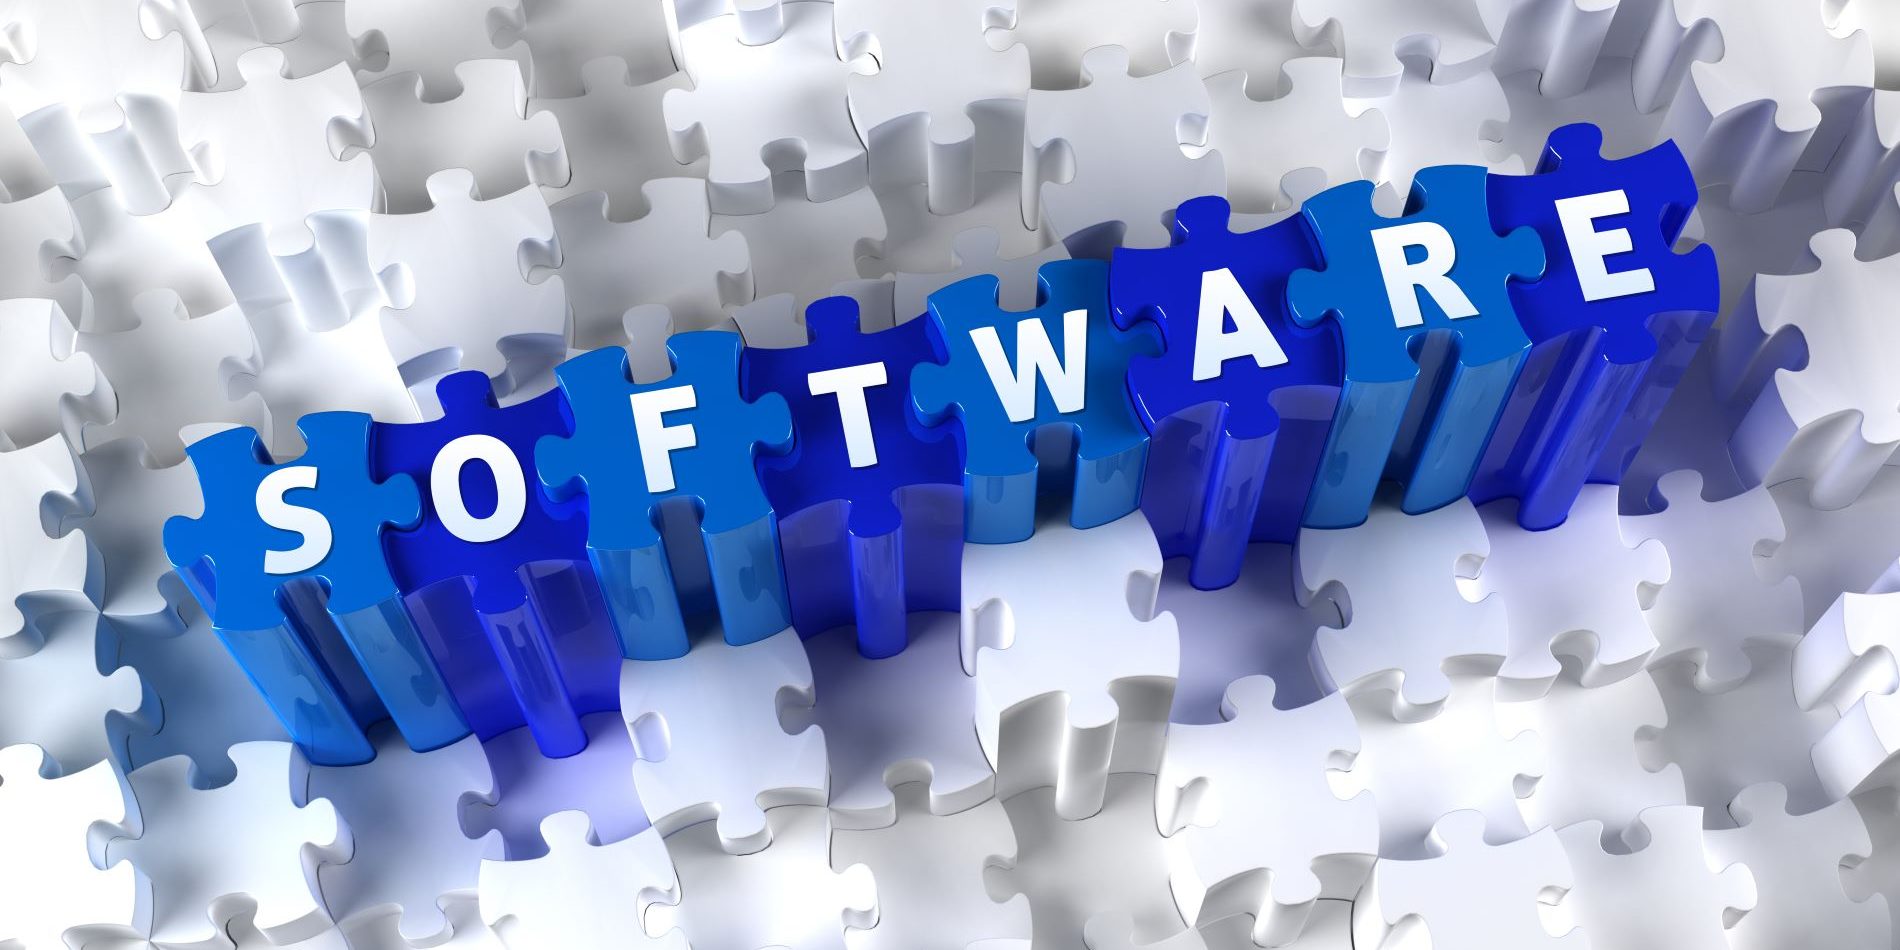 Consolidate your software